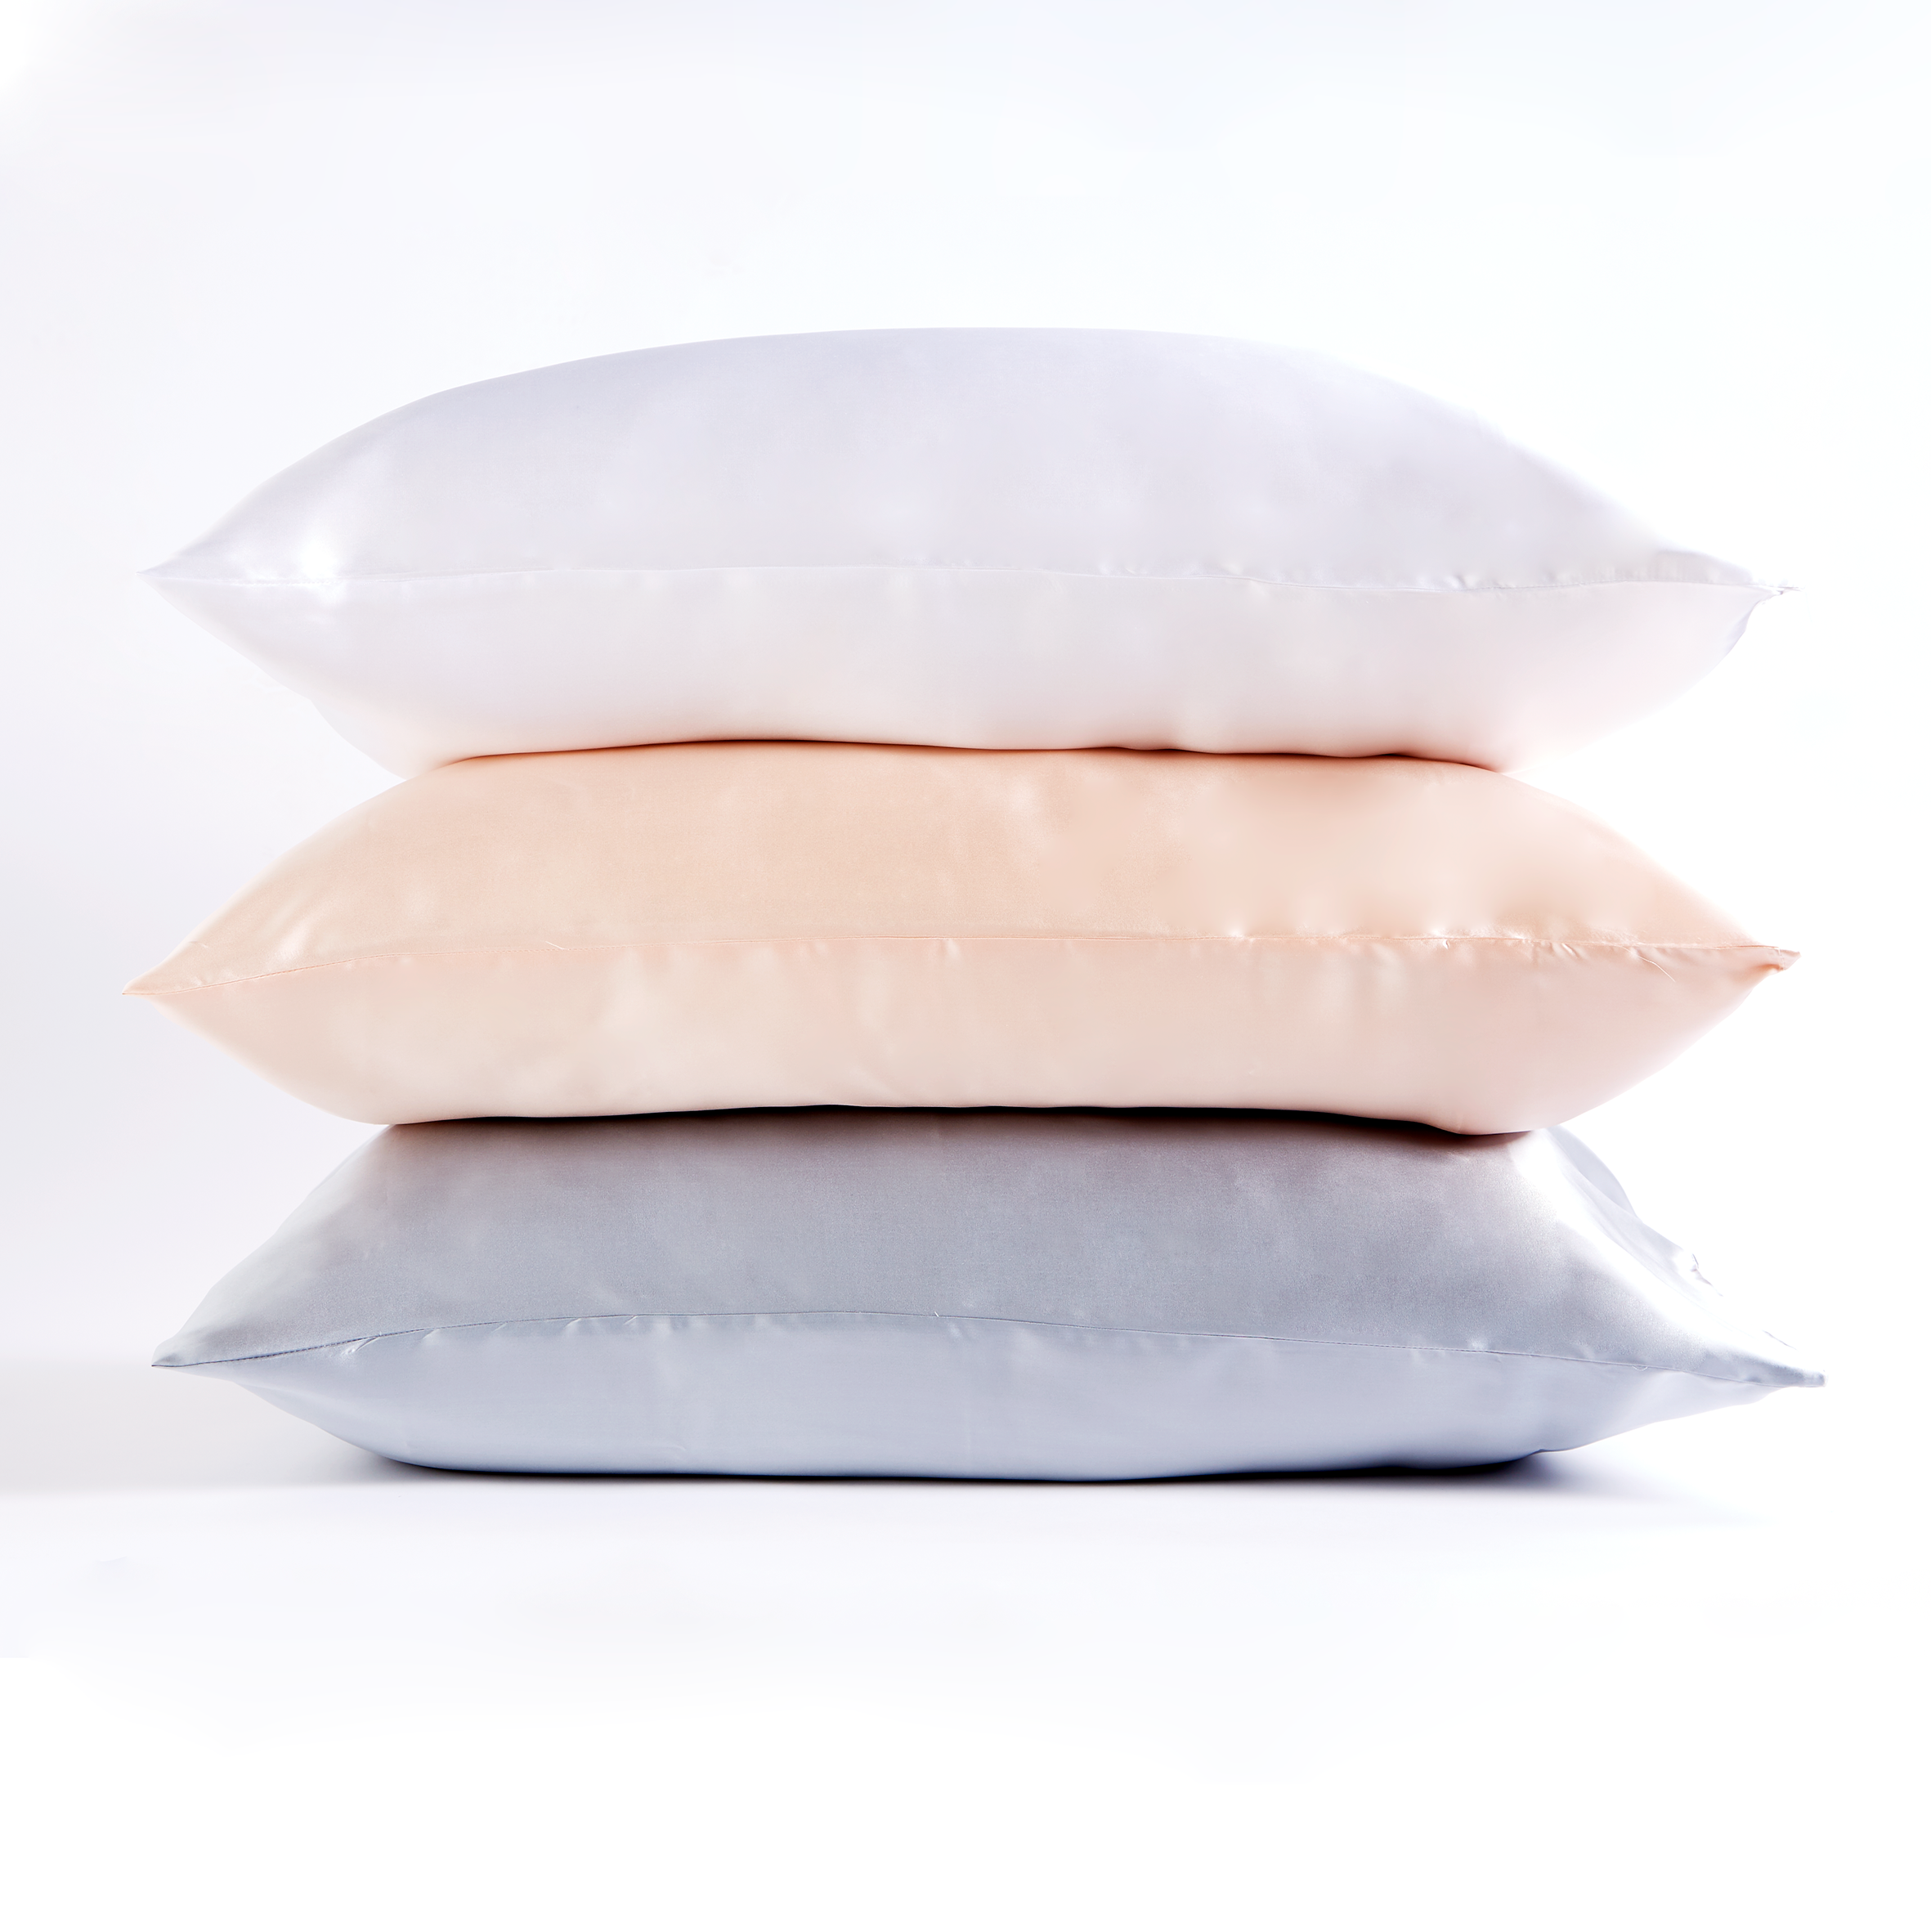 This high quality 100% Mulberry Silk pillowcase is pure sleep luxury. Due to its hypoallergenic properties, protein structure and proven beauty aiding benefits, silk retains moisture which helps to reduce wrinkles, fine lines and maintains healthy hair whilst you sleep. Silk is naturally resistant to dust mites, mould and mildew making it the ideal option for allergy sufferers. Silk contains 18 amino acids that help counter the effects of aging on facial skin. Reduced friction means less drag on skin reducing wrinkles and creases. Natural moisture will not be absorbed from your skin so hydration is preserved across the pillow. Natural proteins in silk help to maintain the natural oils in your hair and keep it smooth throughout the night.
One silk pillowcase comes in a beautiful gift box ideal for that perfect present.
Material: 100% Mulberry Silk Colours: Available in white, blush and ice grey.
Dimensions:  Box: 14cm x 9cm Pillowcase: Housewife 55cm x 75cm
Washing instructions: Hand wash or delicate machine wash with a gentle non-biological detergent.